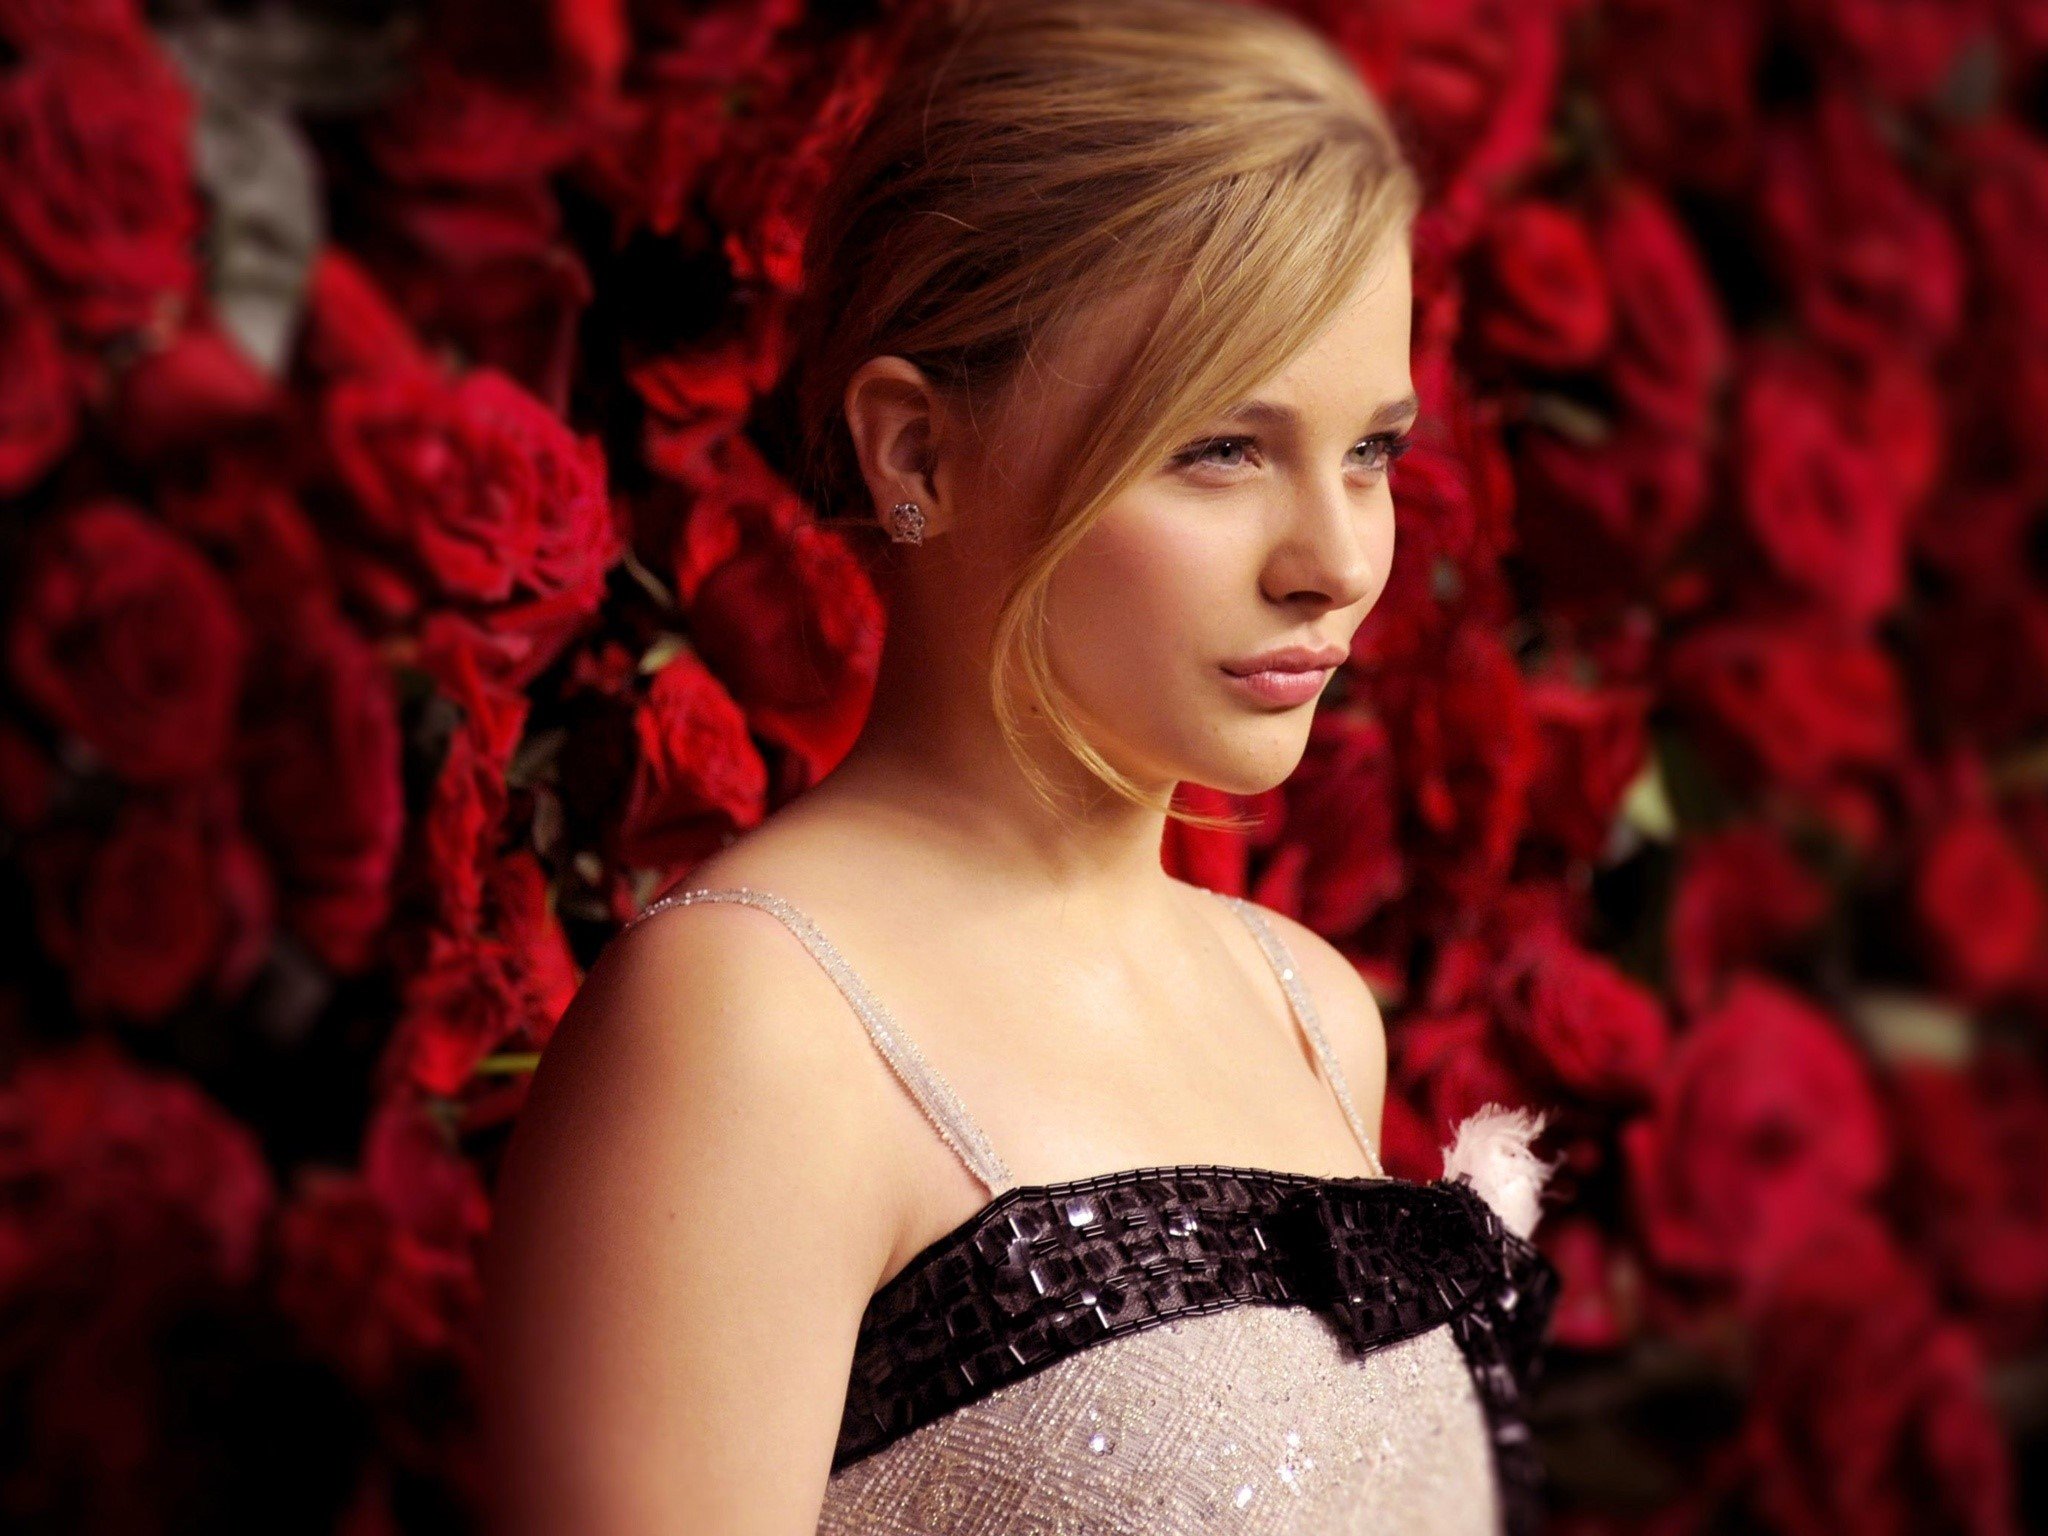 Wallpaper Chloe Moretz and roses in the background